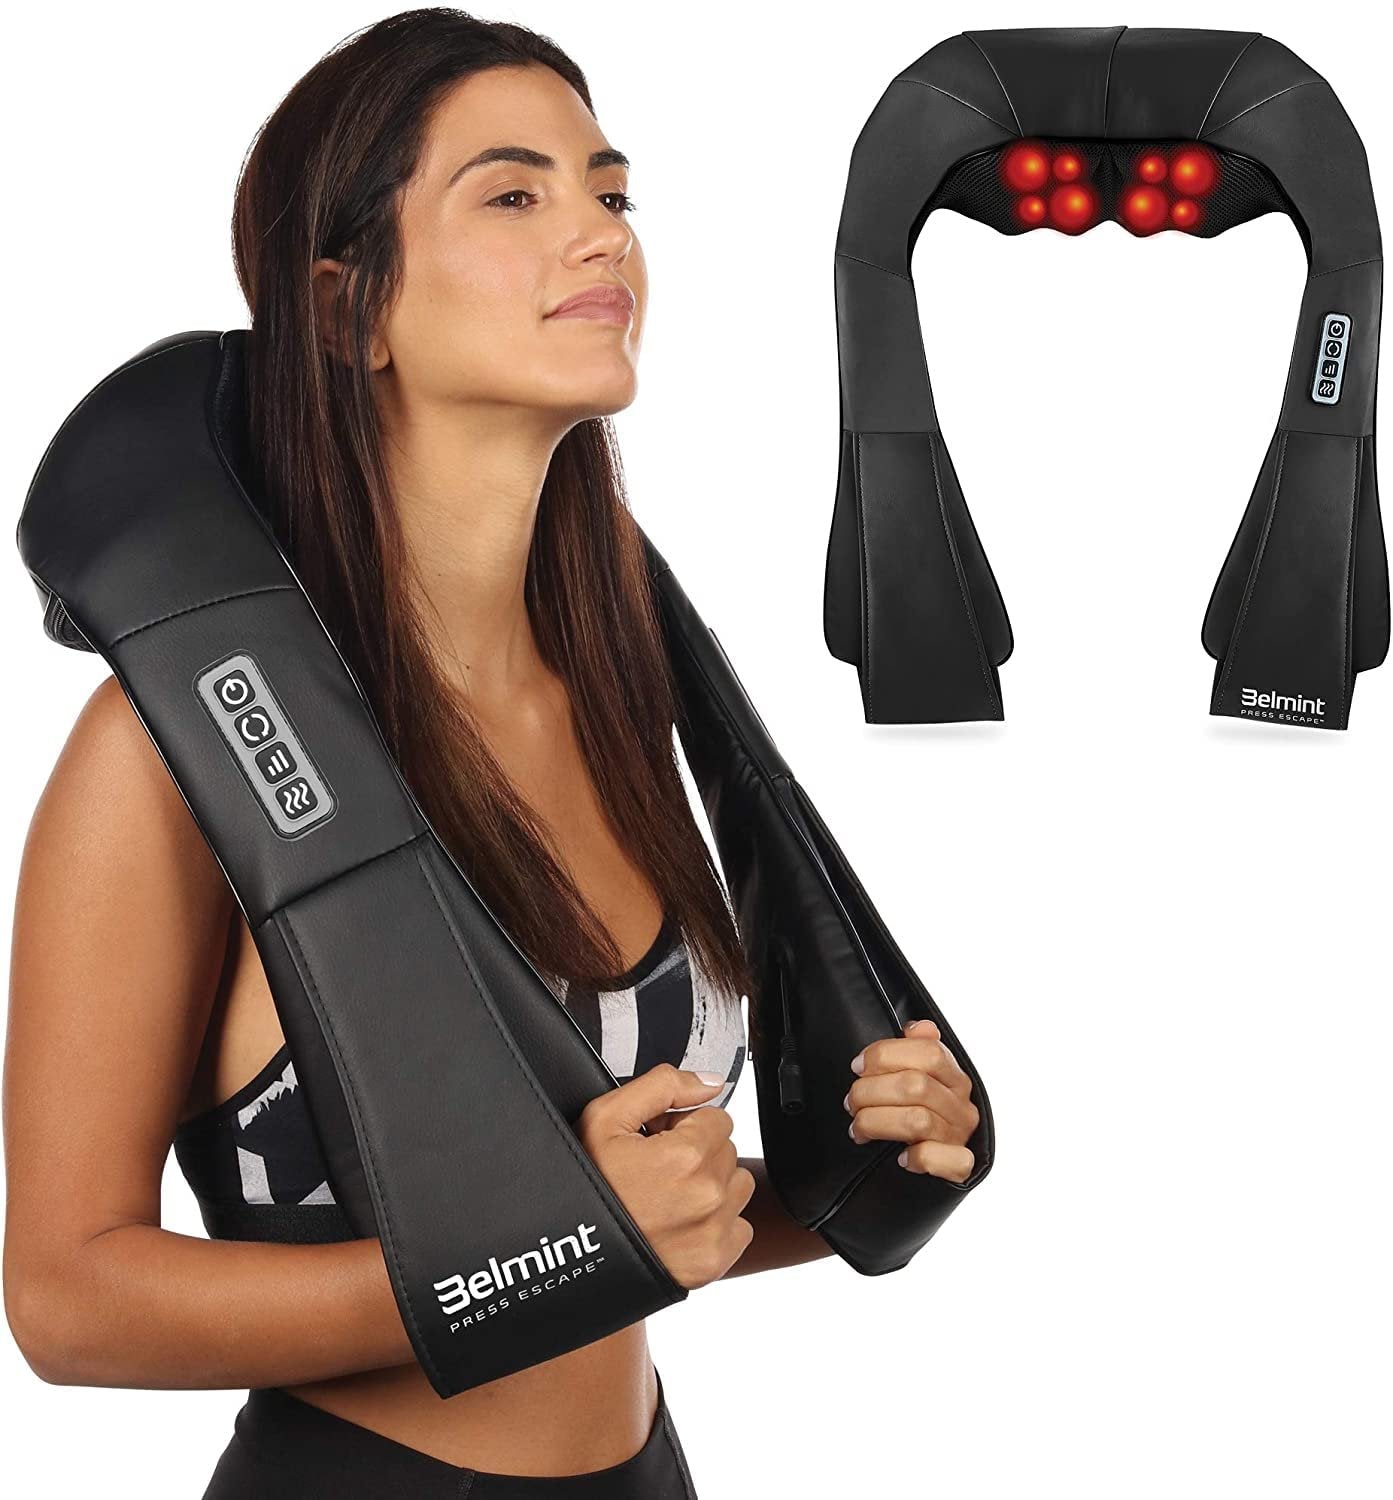 Deep Kneading Neck Massager with Heat - Shiatsu Neck Back and Shoulder Massager for Home Office Use Corded Electric (Black)